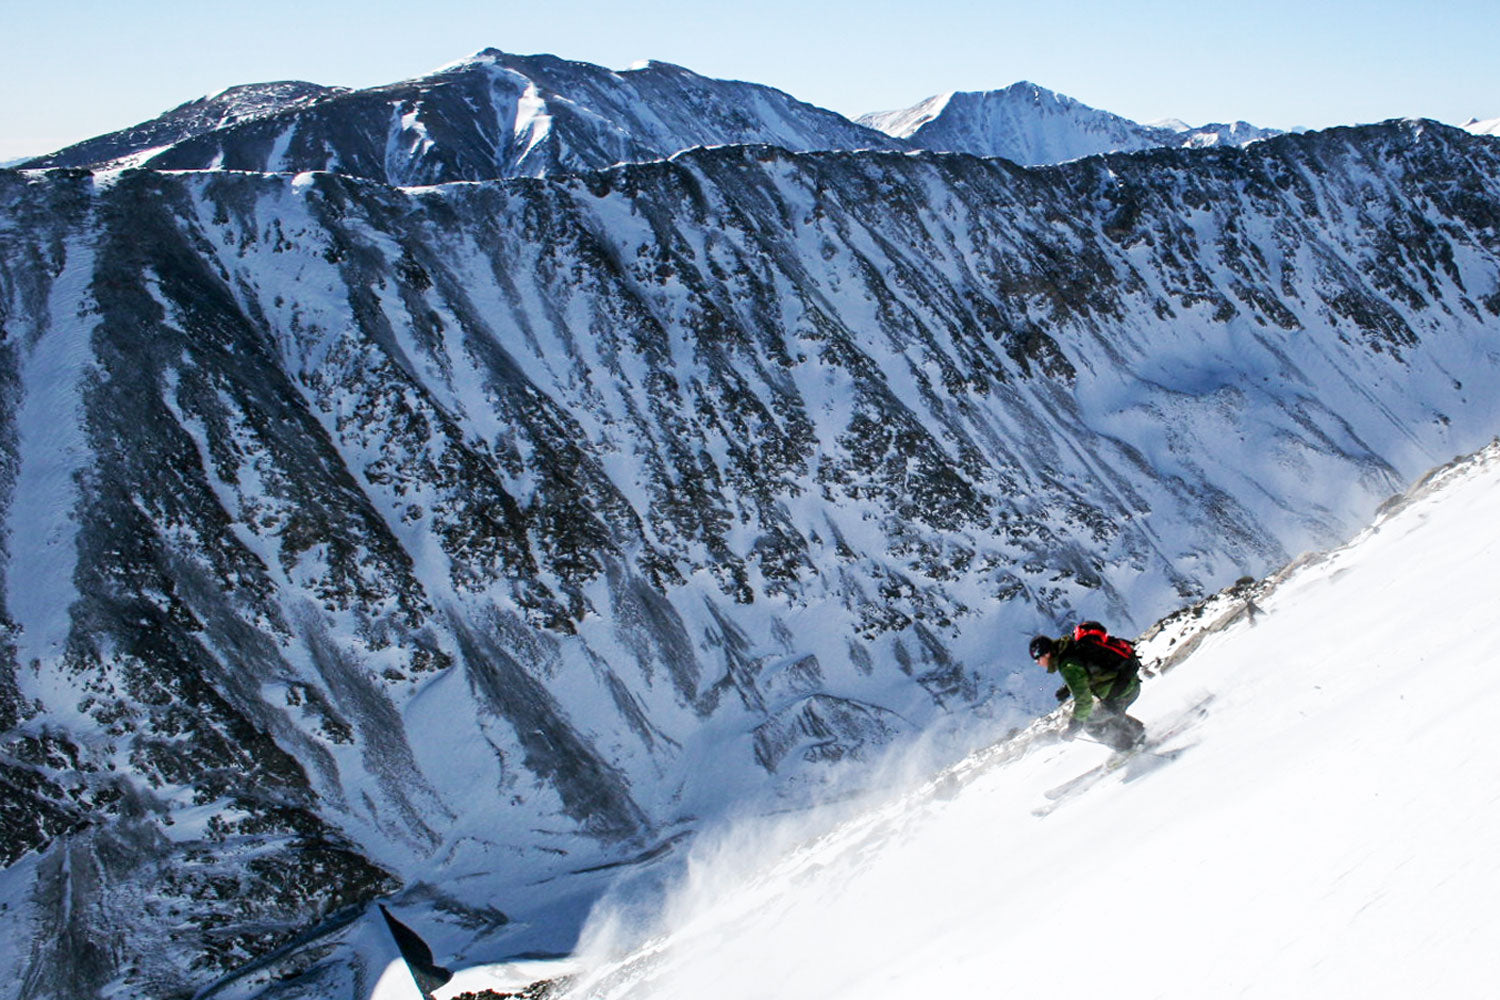 Backcountry skier on Quandry